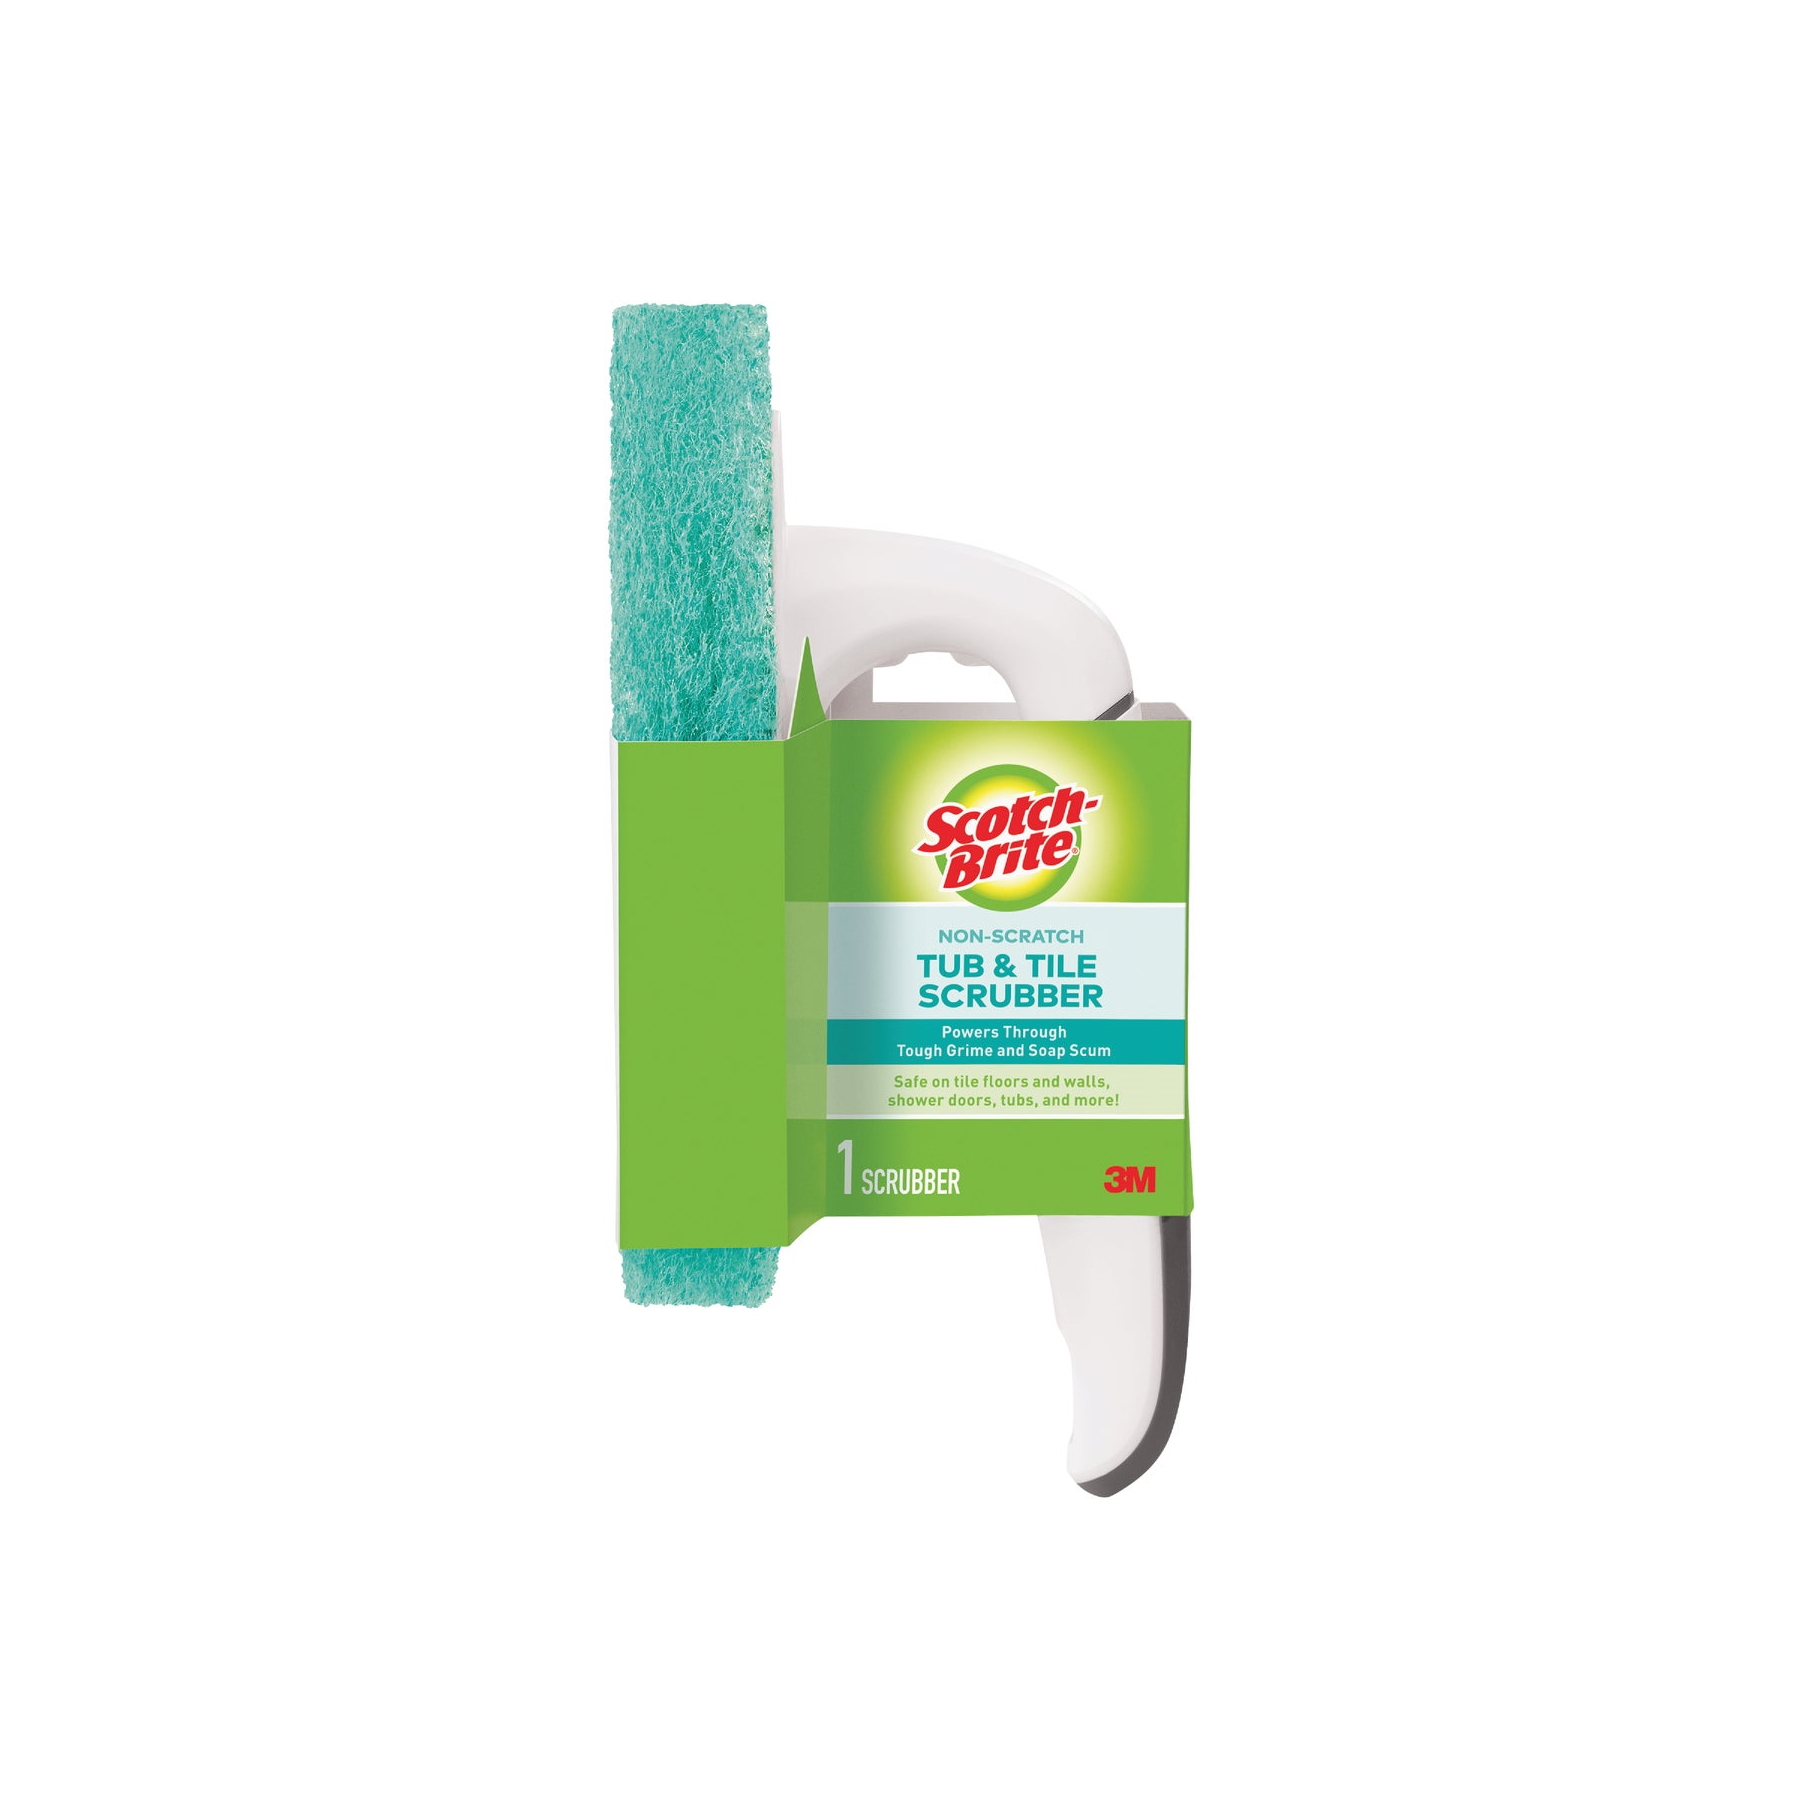 https://www.berings.com/wp-content/uploads/2020/09/3M-Scotch-Brite-Switchable-Cleaning-Scrubber-with-Handle3.jpg